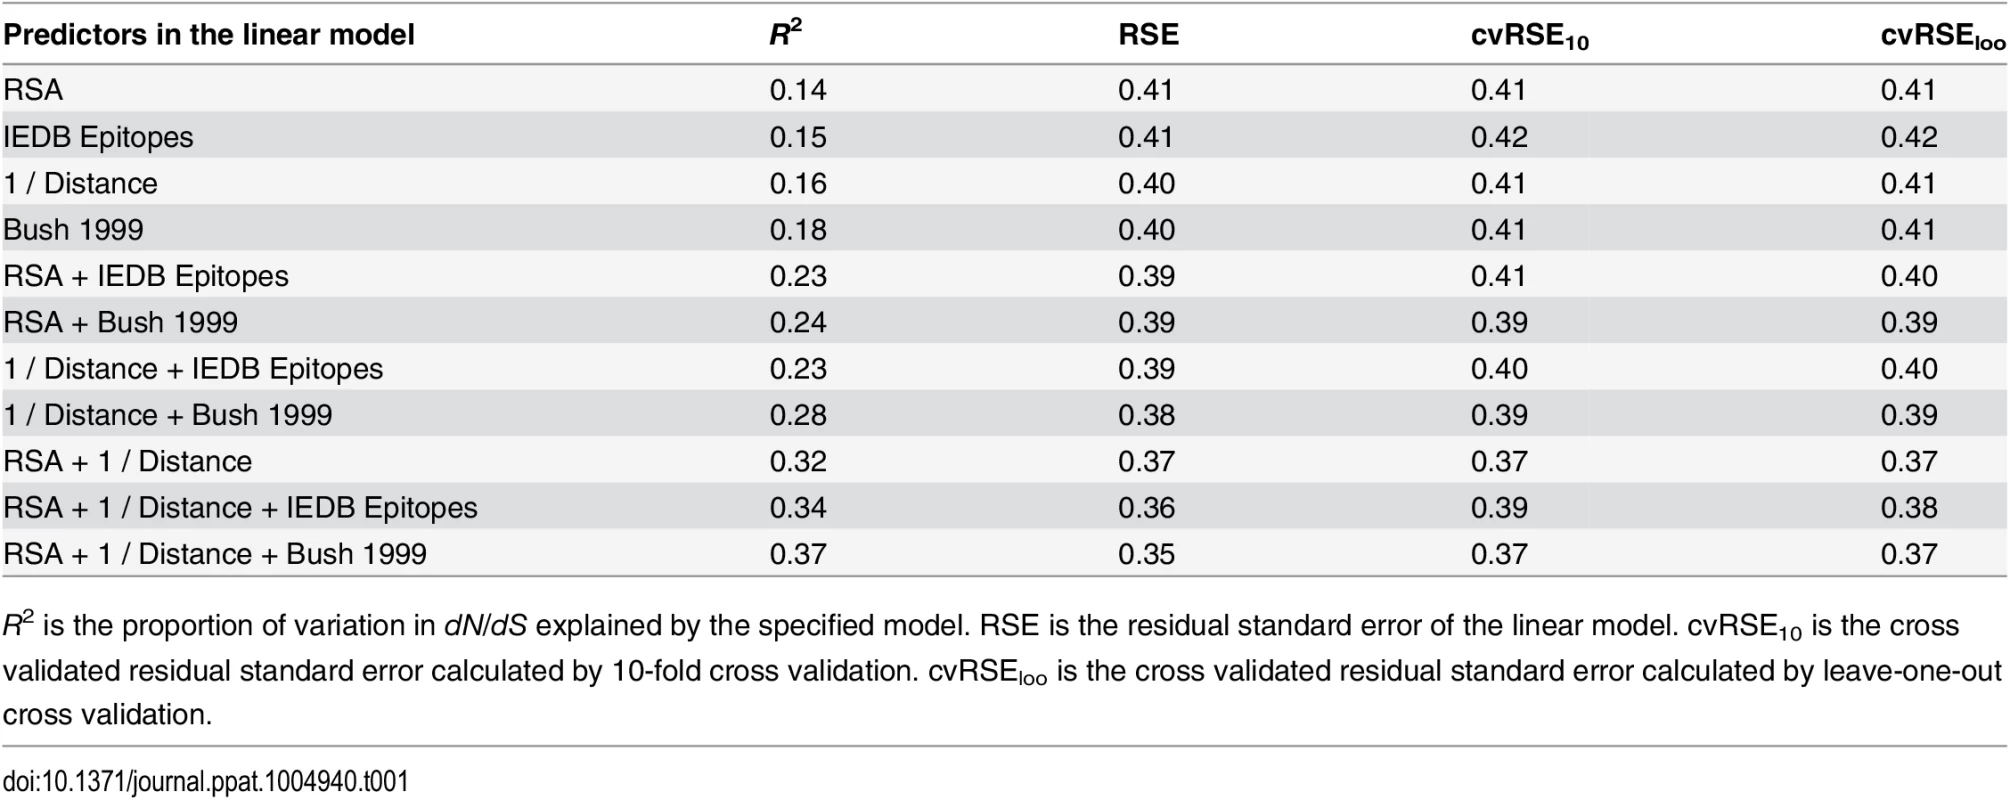 Predictive performance of each linear model considered.